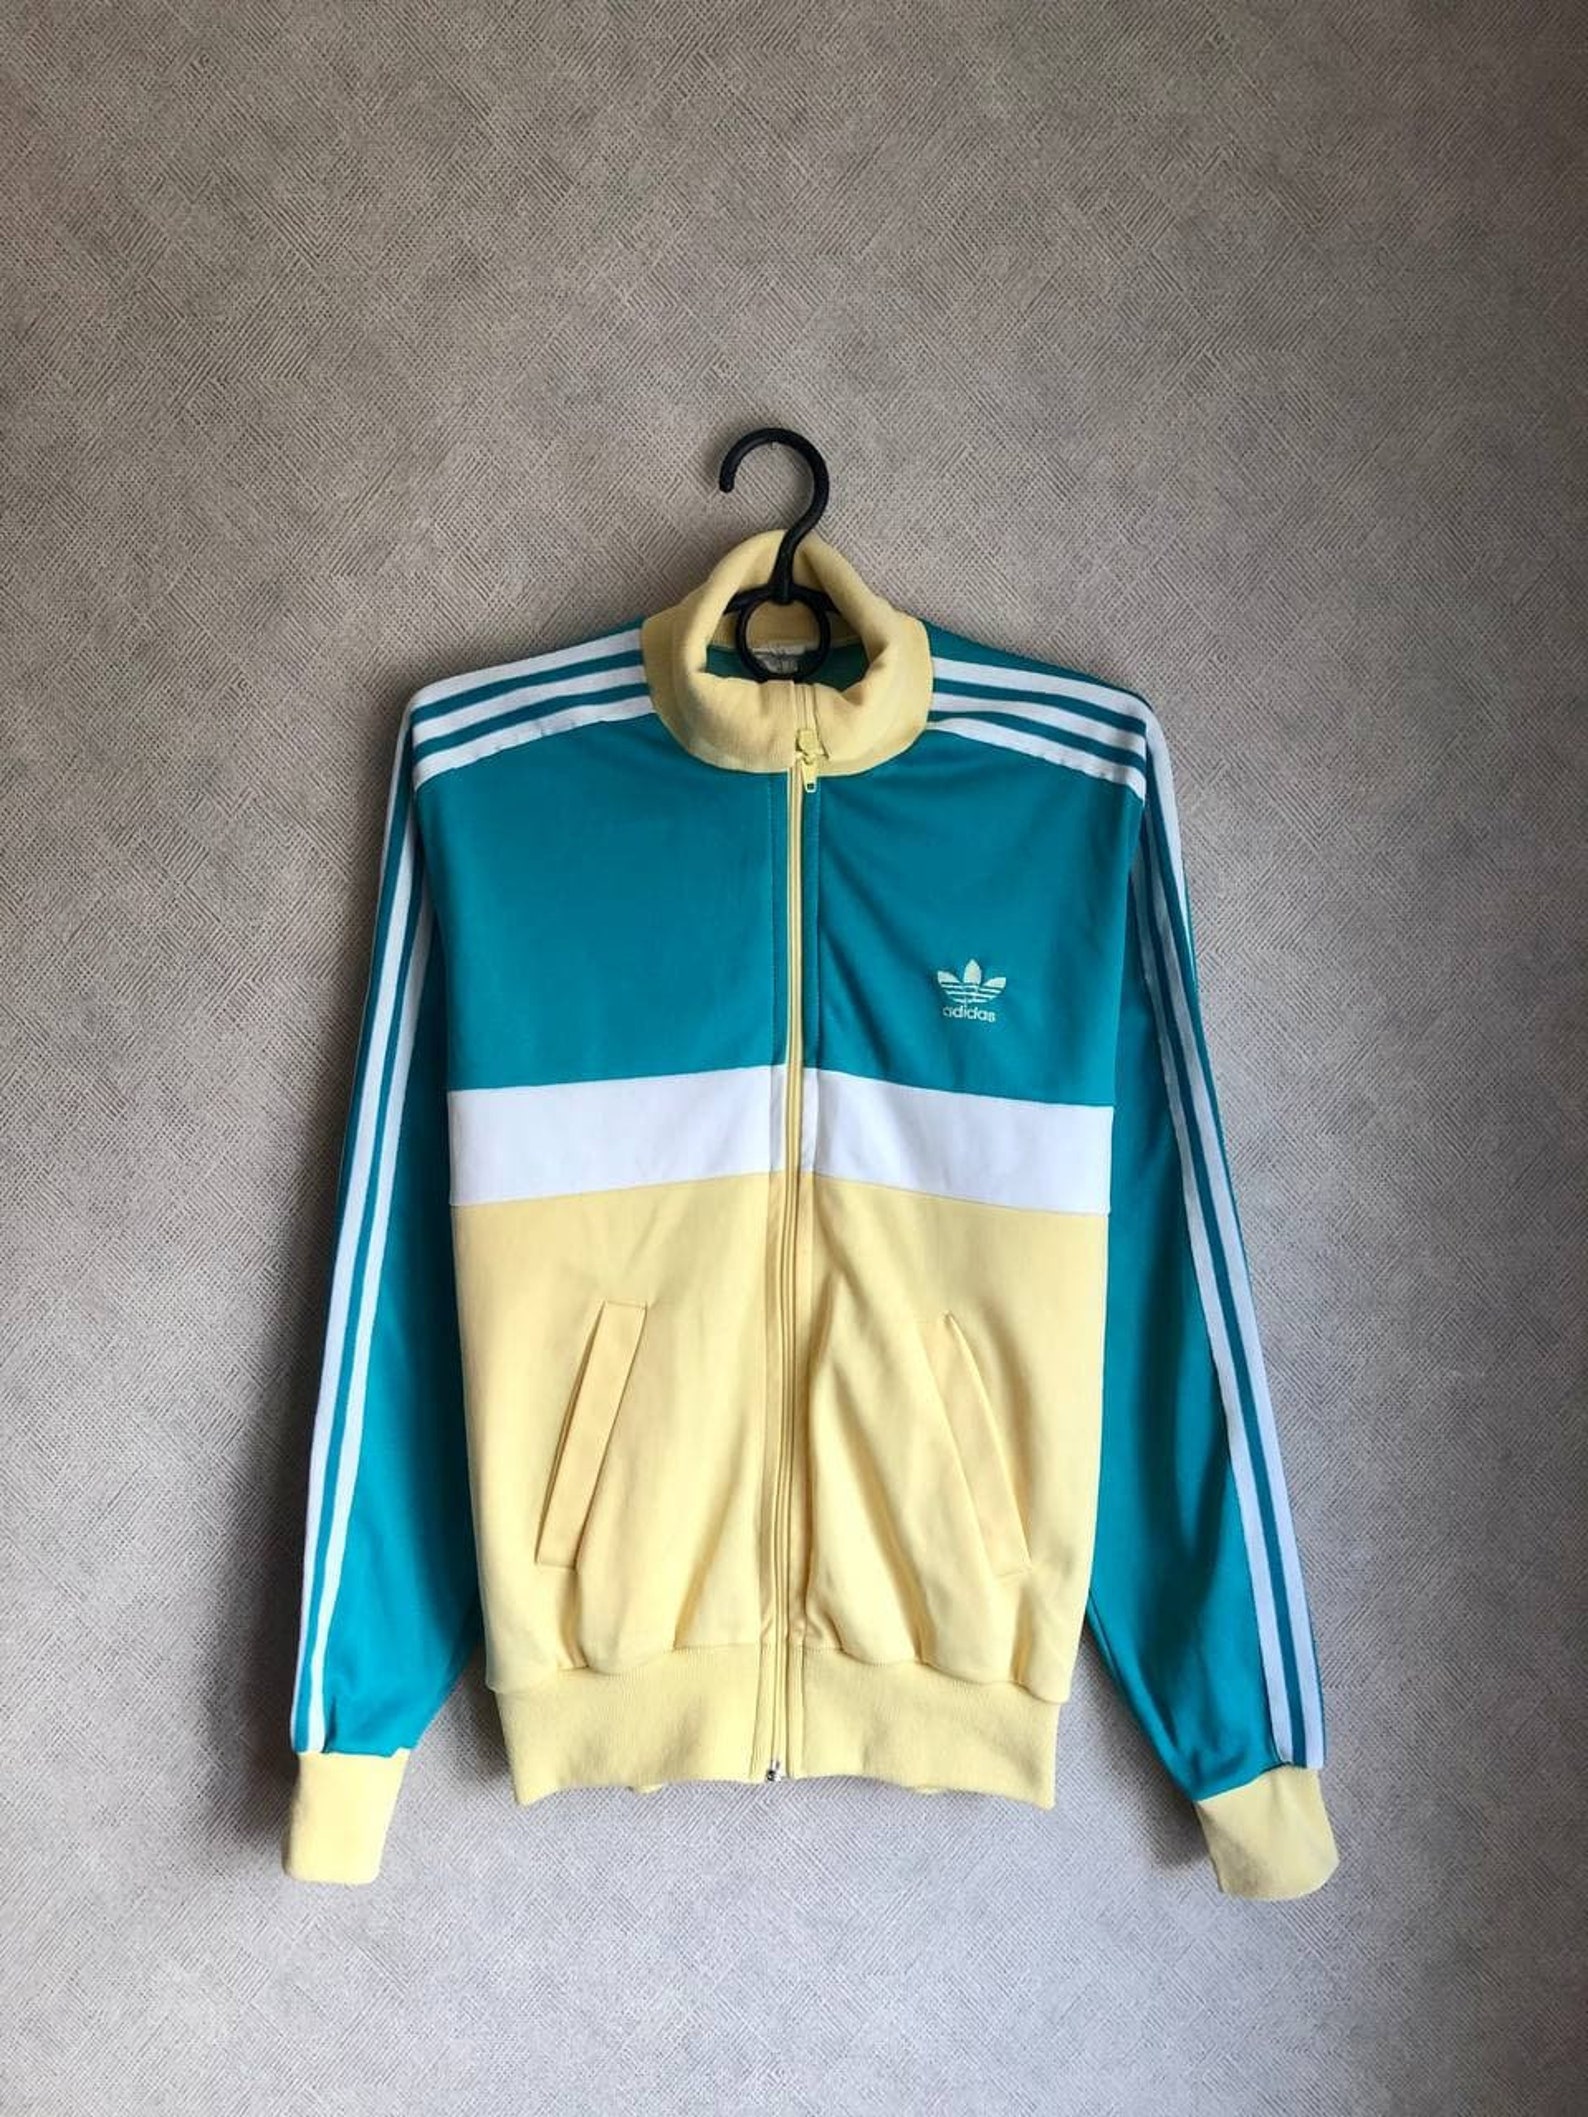 Vintage 70's 80's Adidas Track Jacket Made in England | Etsy